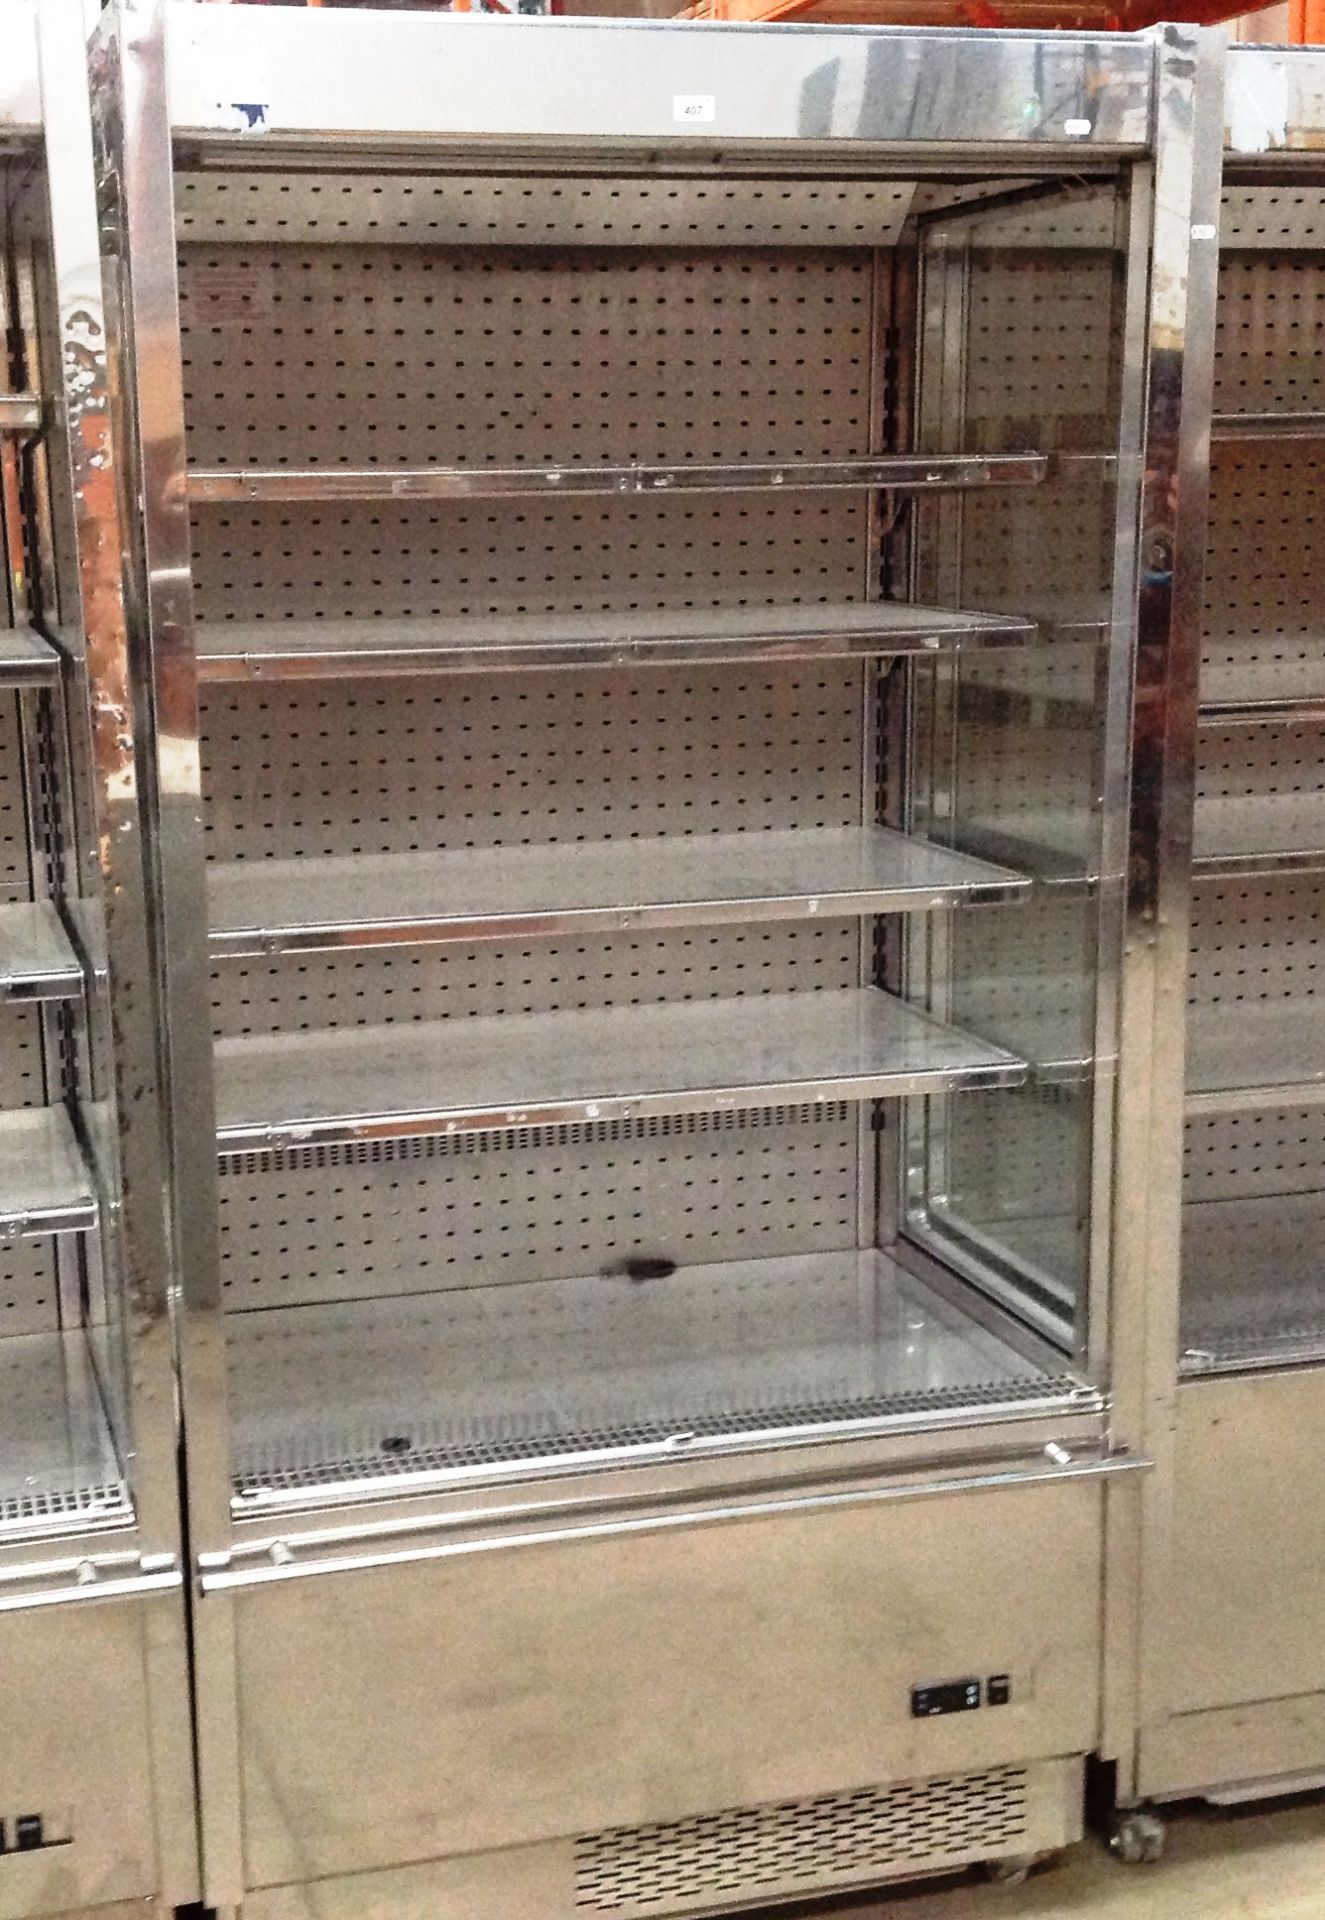 A stainless steel cased mobile chilled food display cabinet with shelves and roller front